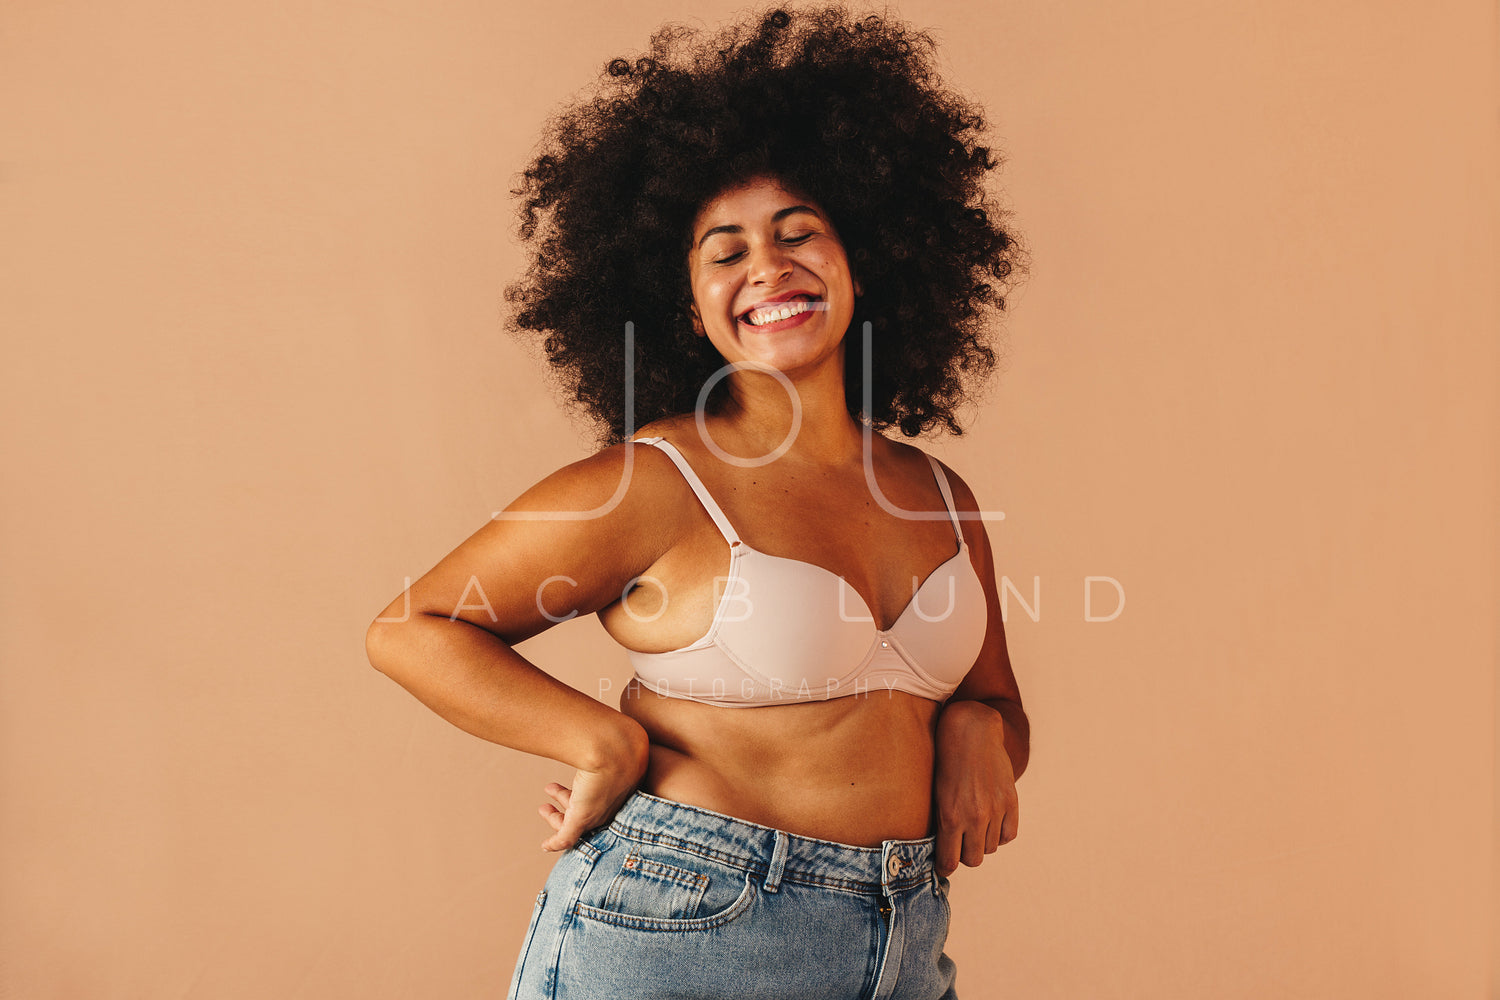 Curvy woman smiling happily while wearing a bra and jeans – Jacob